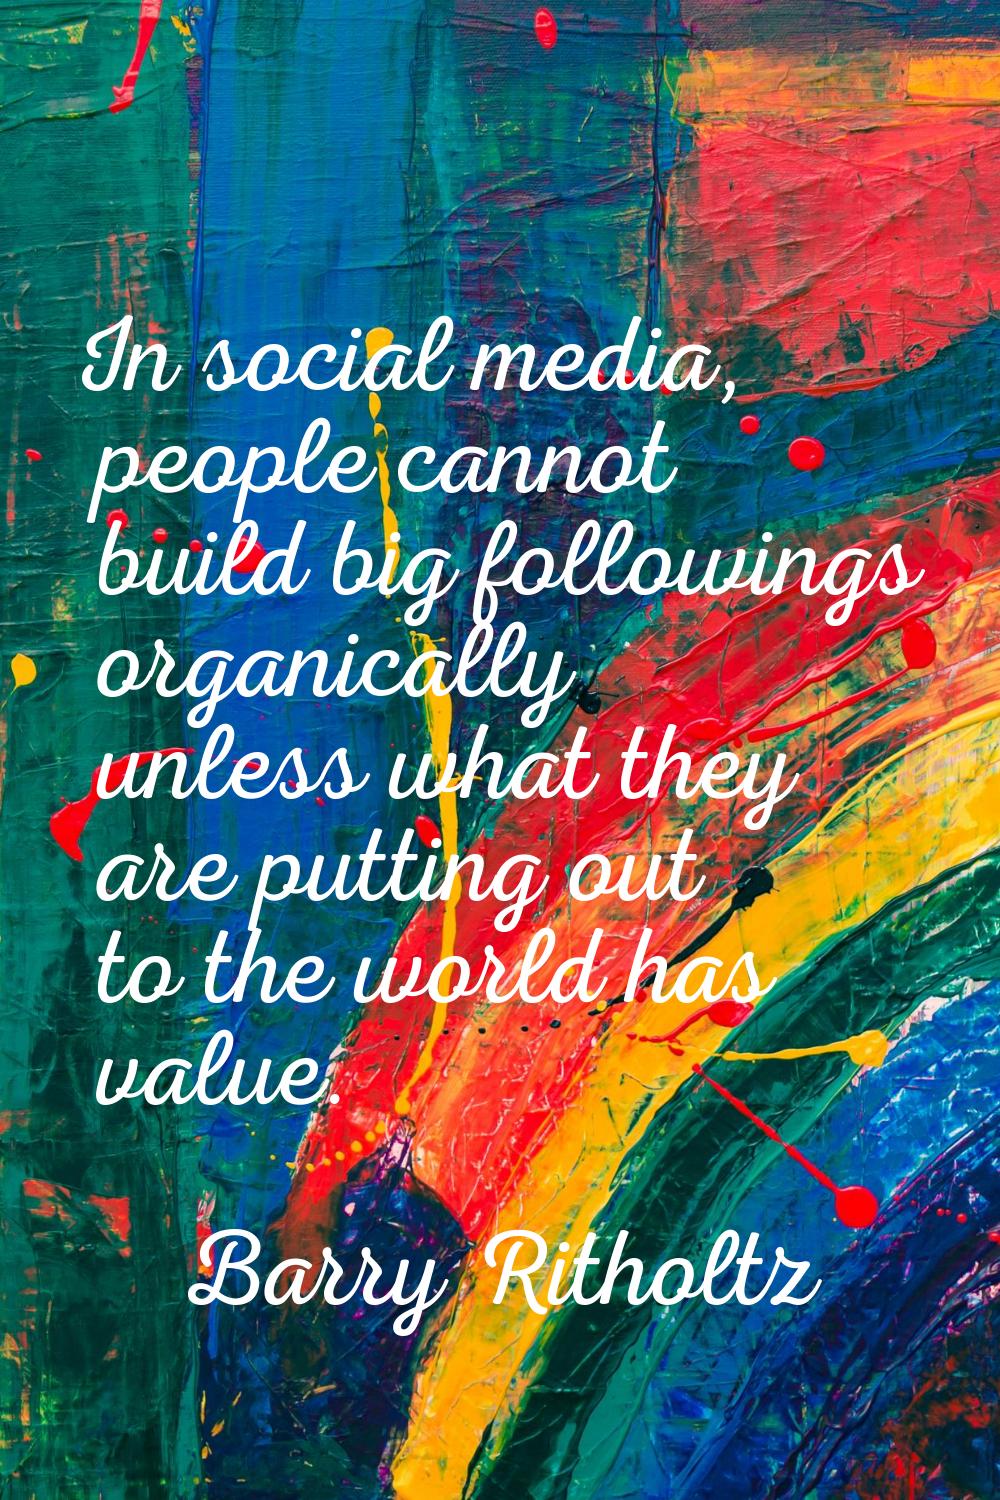 In social media, people cannot build big followings organically unless what they are putting out to